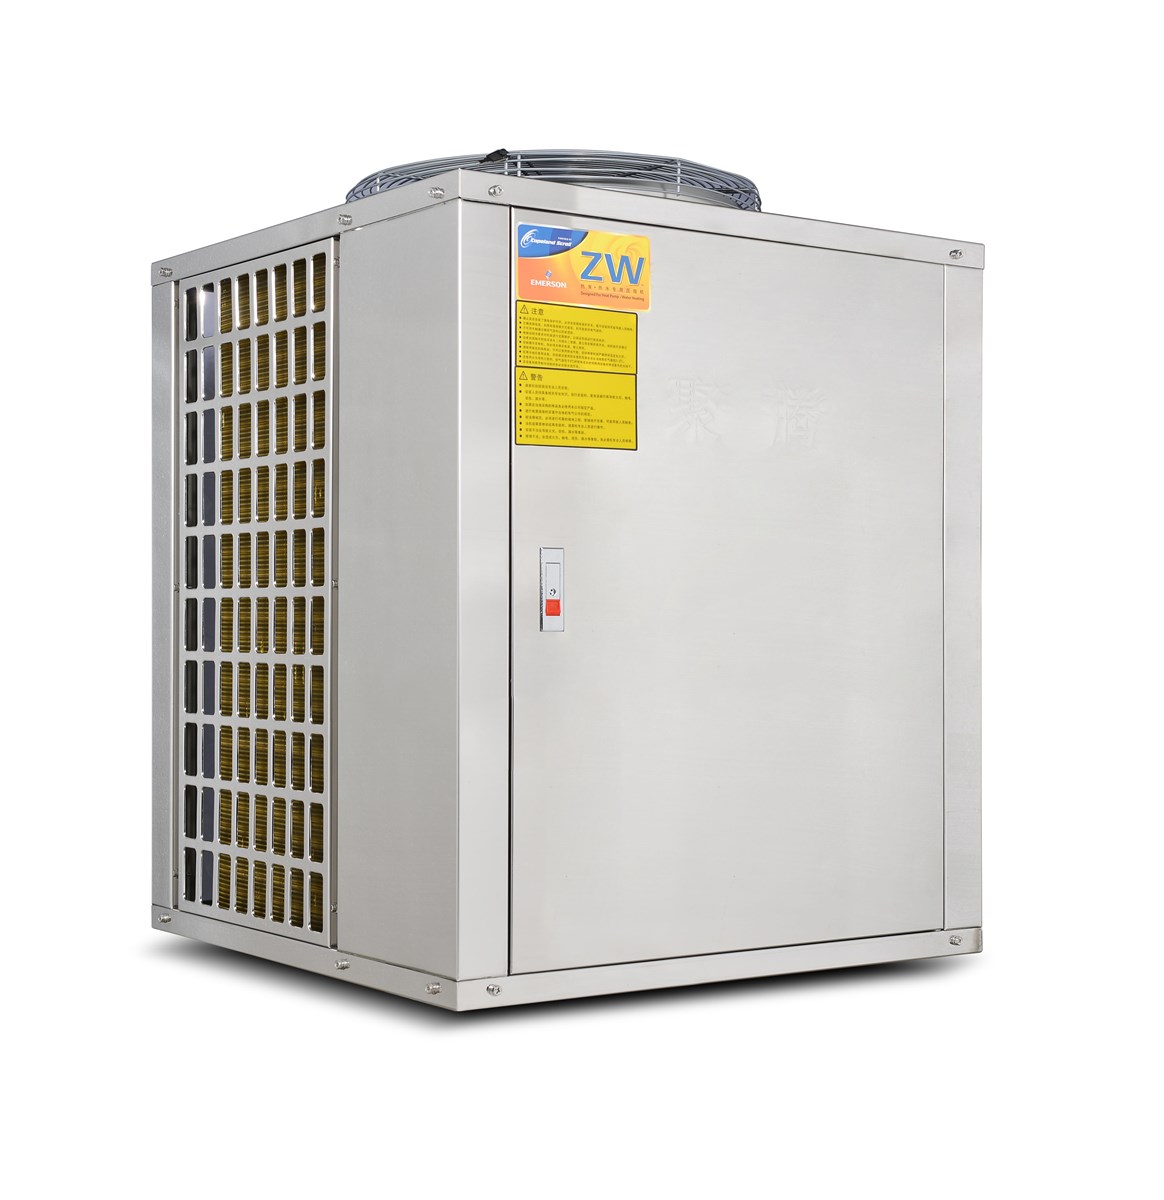 EIV DC Inverter Air Source Heat Pump for Heating Cooling